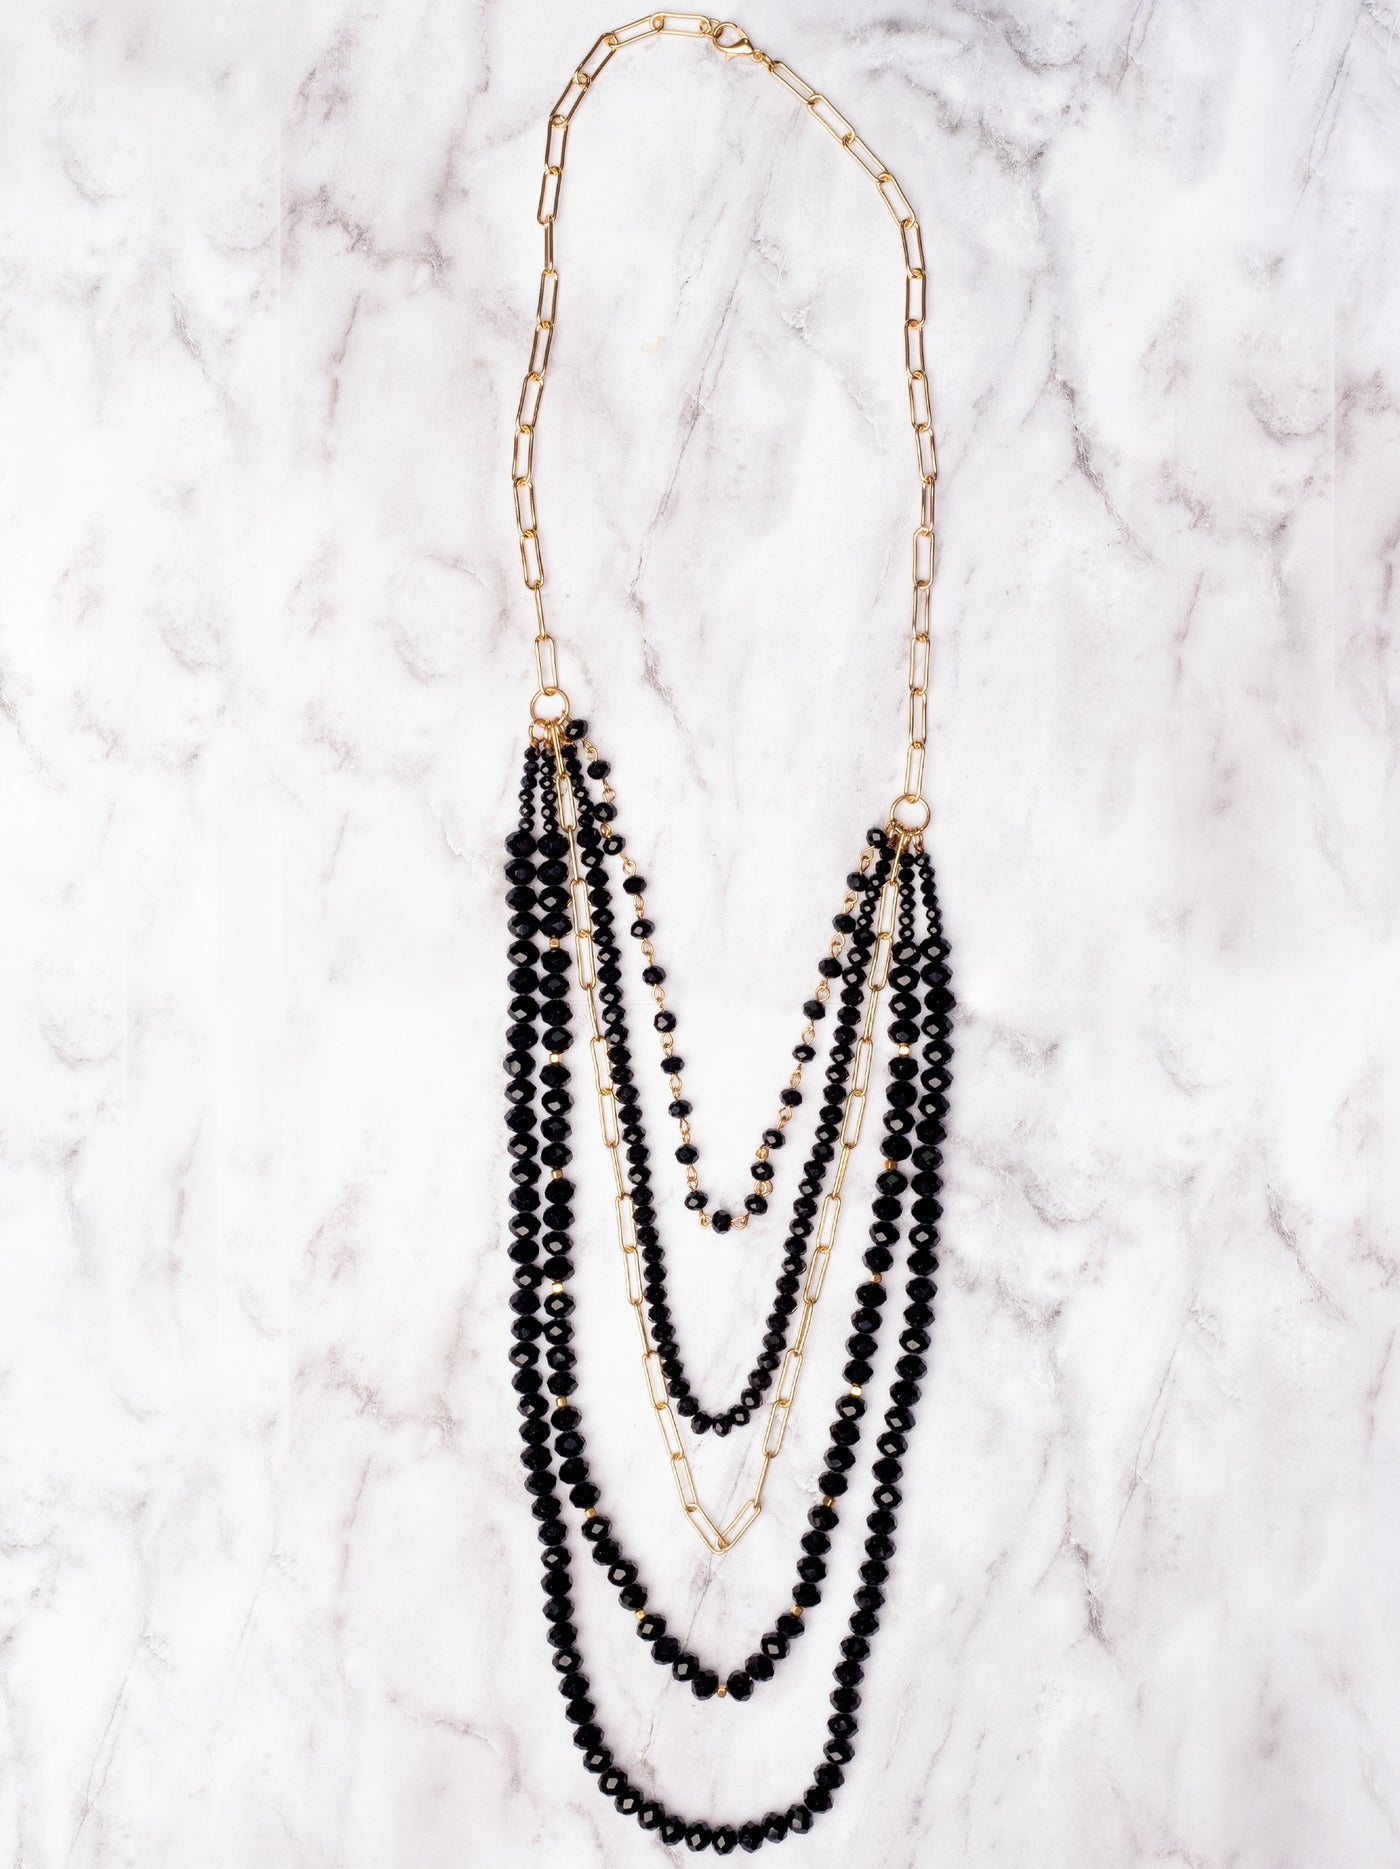 LATE NIGHTS IN NEW YORK CITY BLACK CRYSTAL LAYERED GOLD LINKED NECKLACE